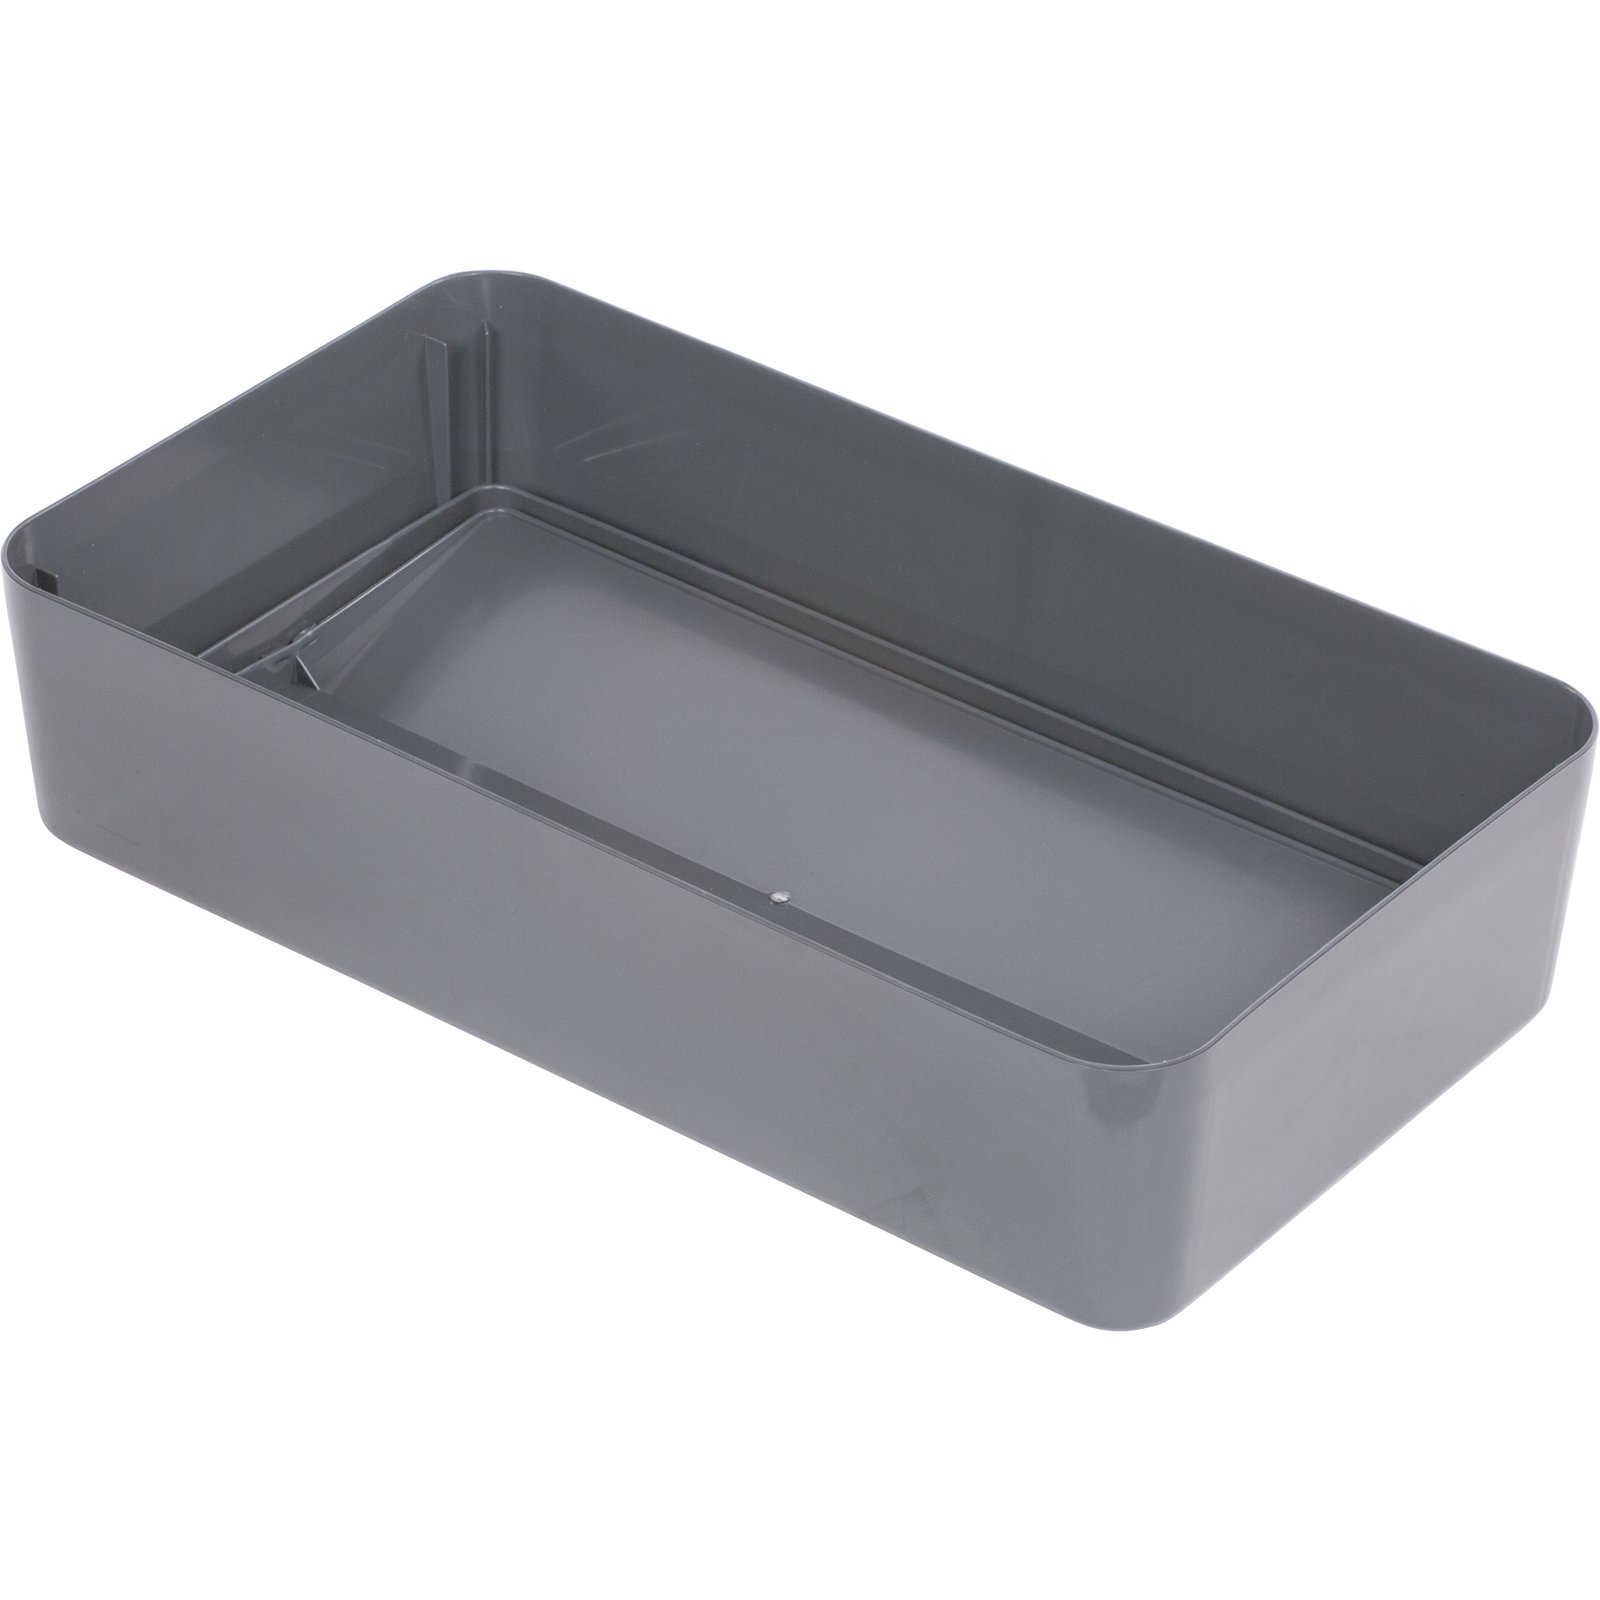 1225-02GY Grey Square Garbage Can Lid with Swing Top for 25 Gallon Garbage  Cans